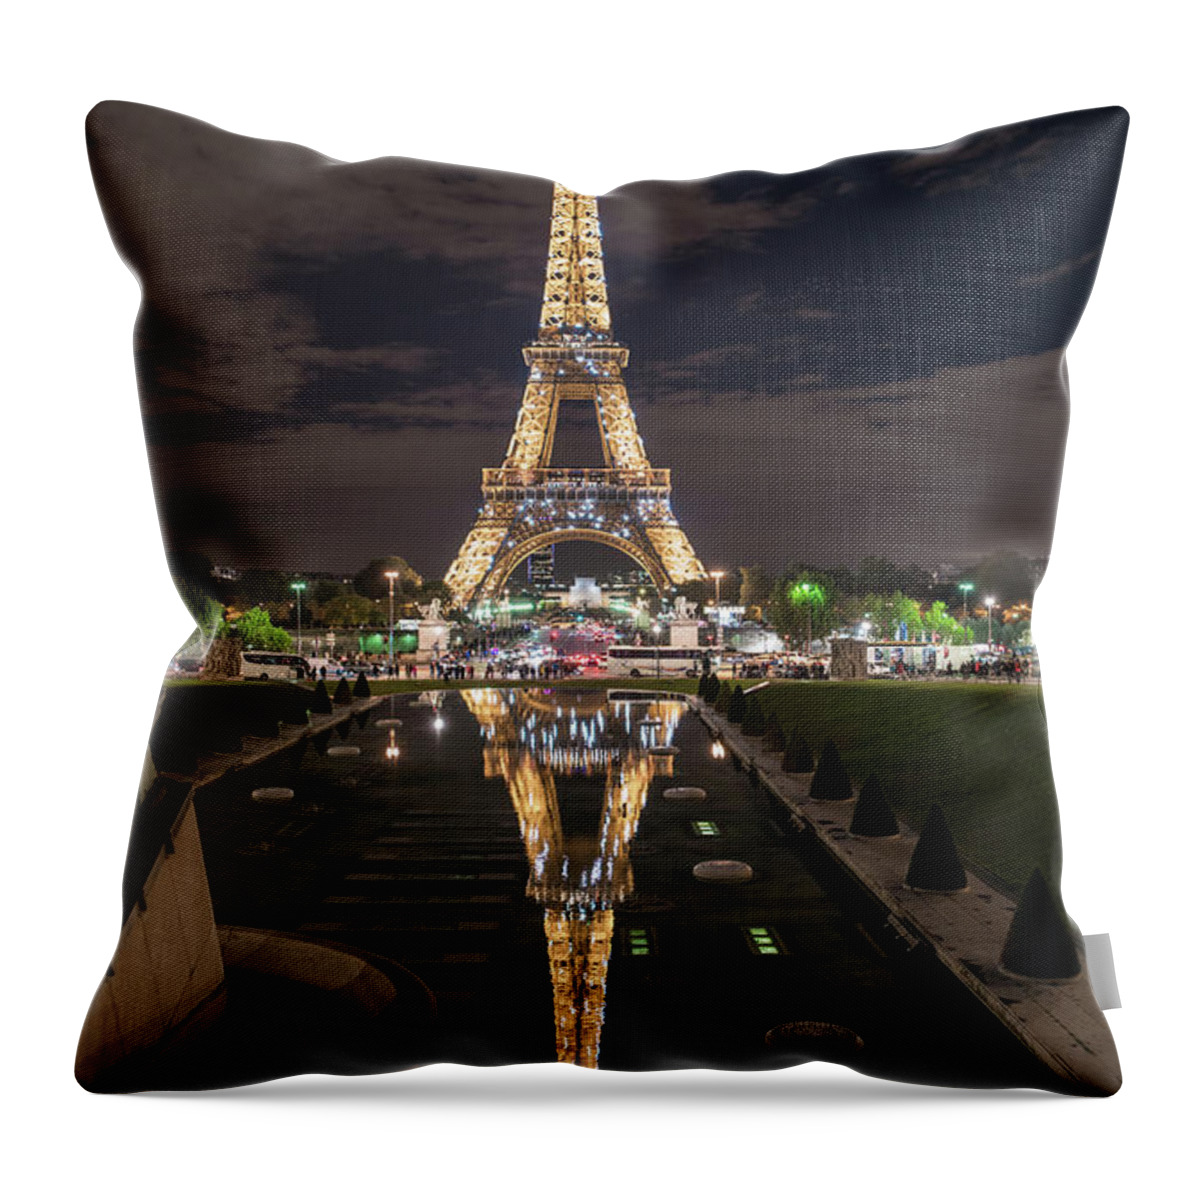 Eiffel Tower Throw Pillow featuring the photograph Paris Eiffel Tower Dazzling at Night by Mike Reid